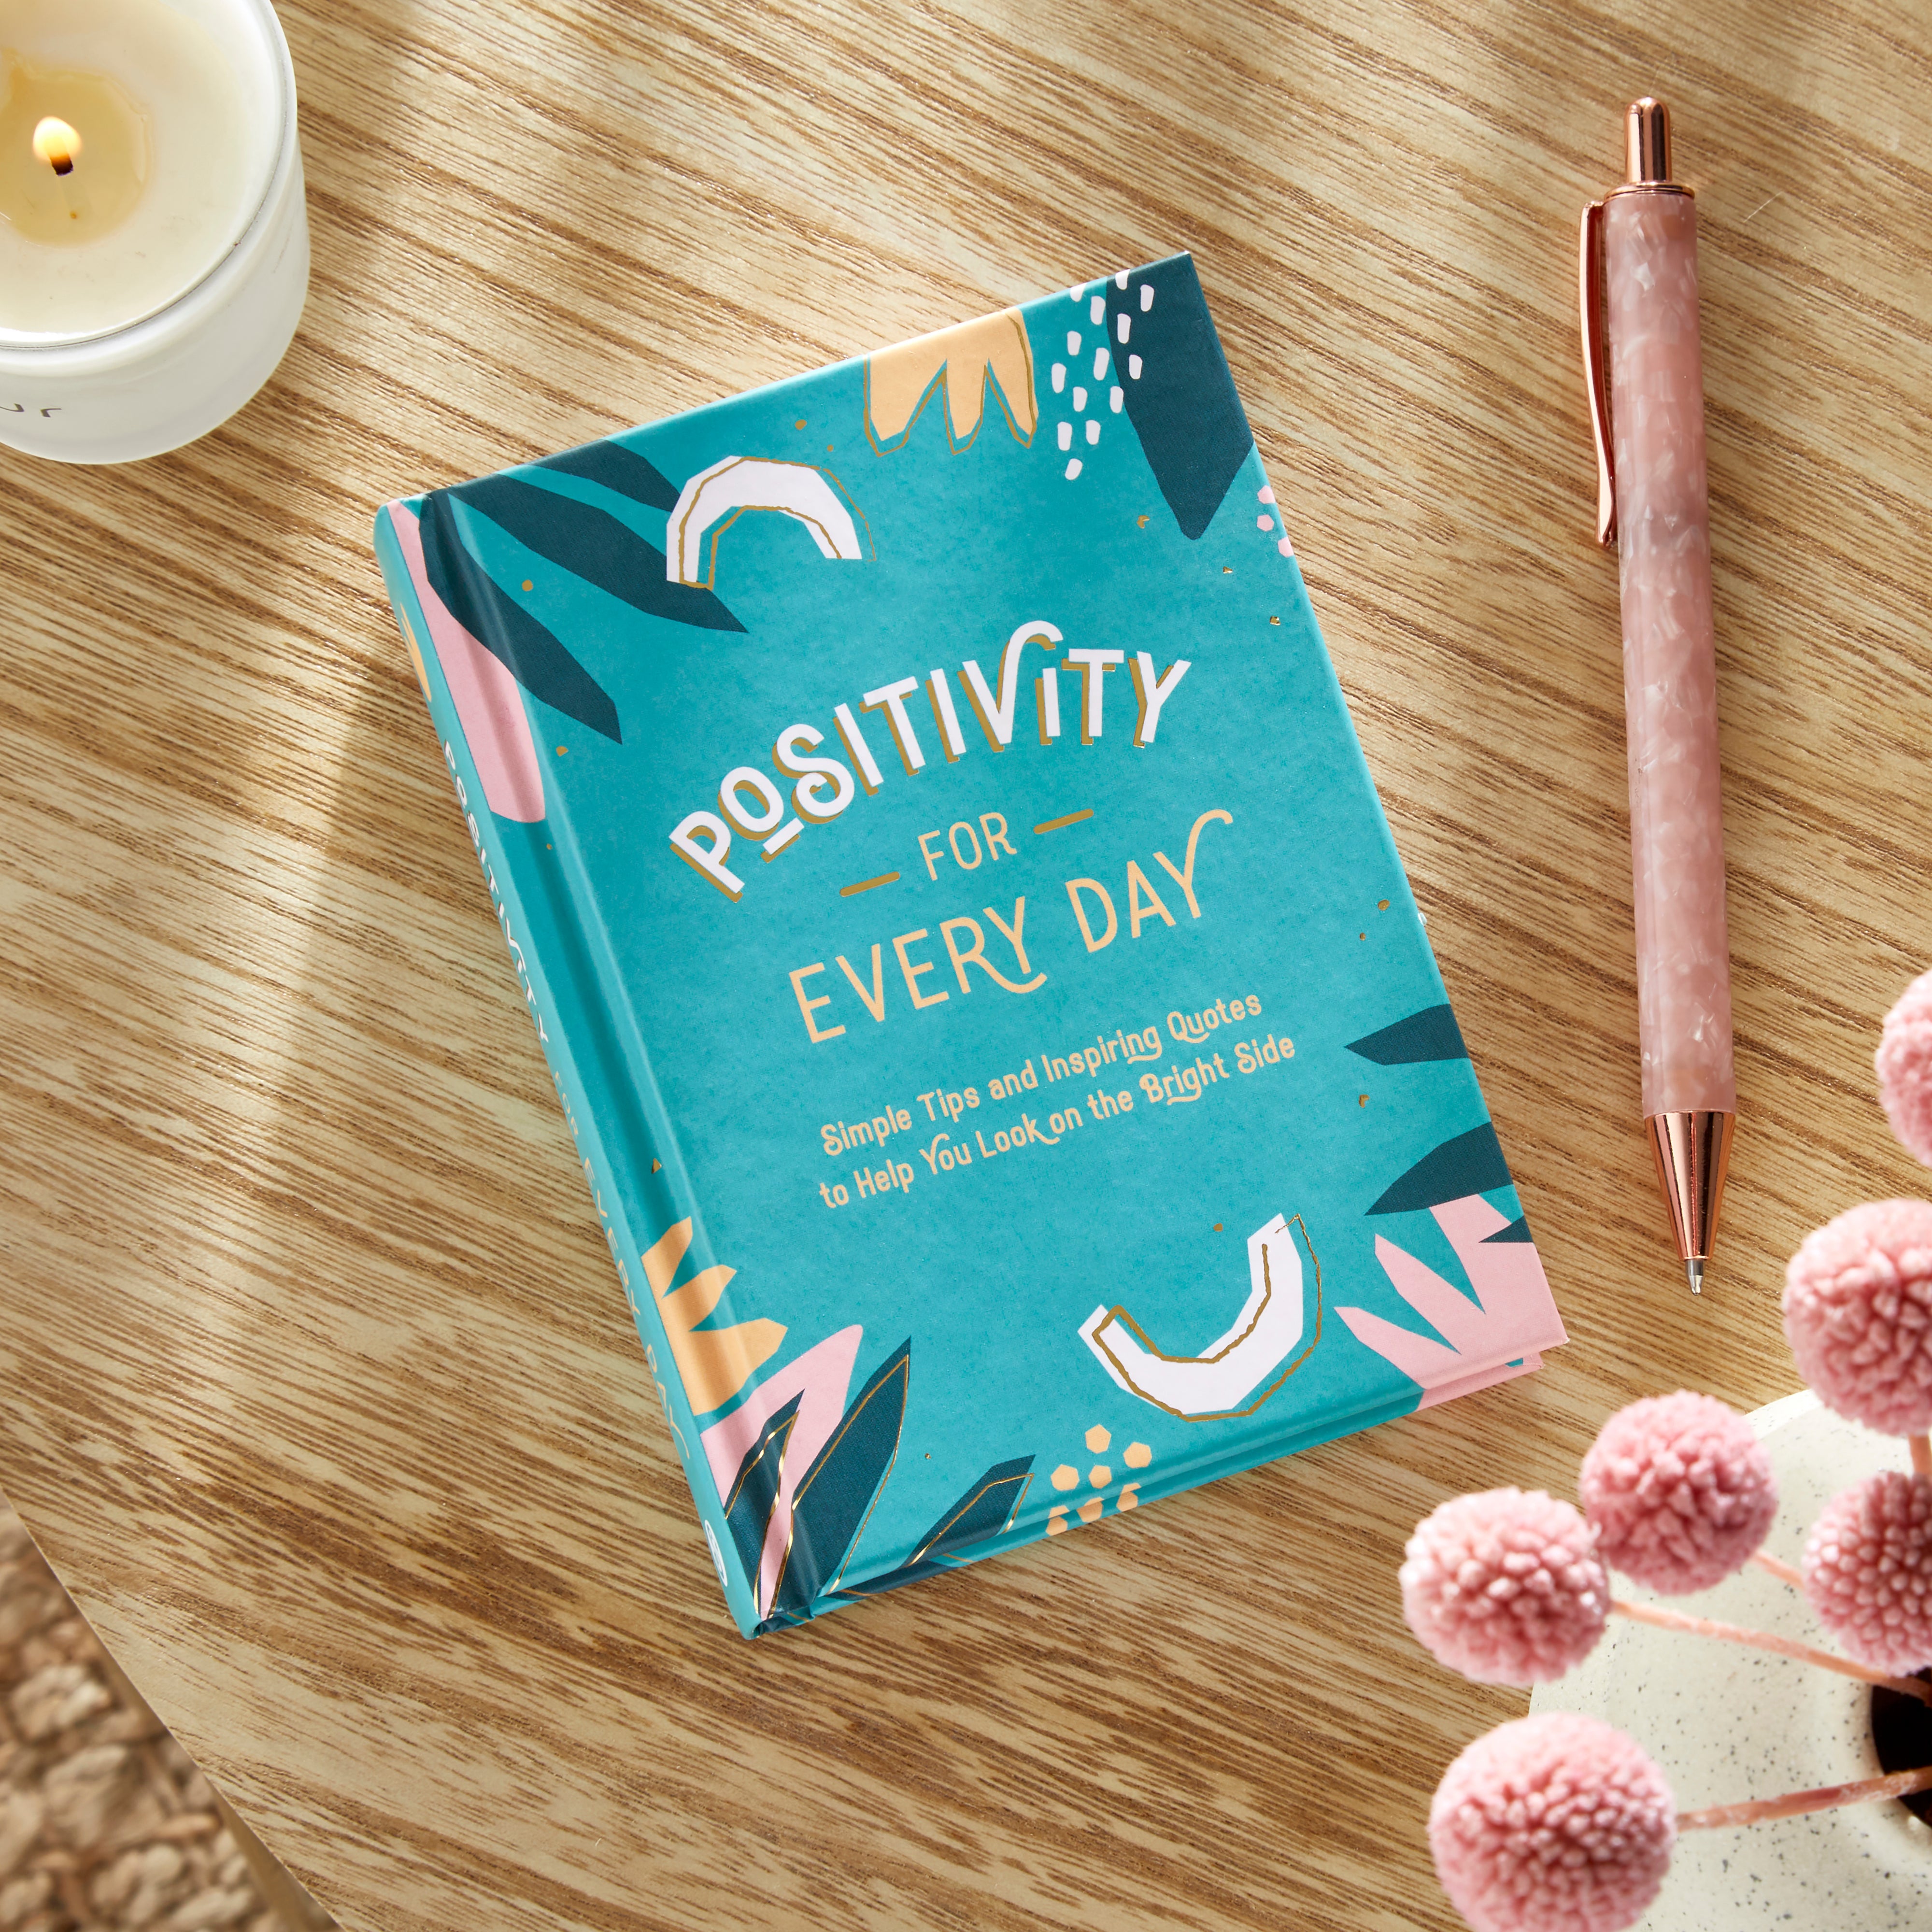 Positivity for Every Day Book